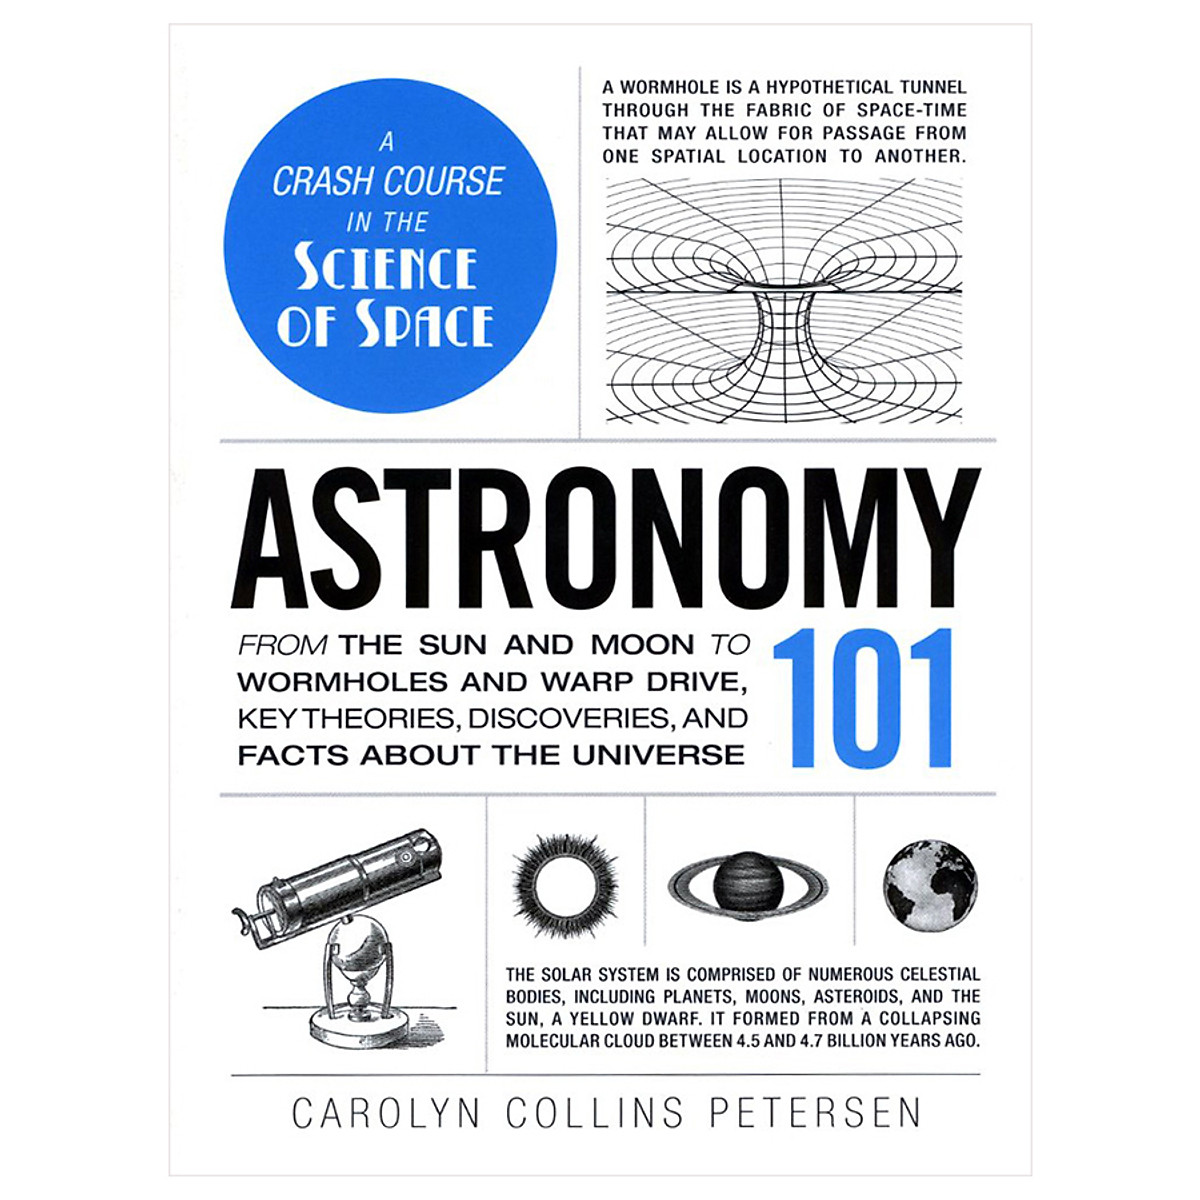 Astronomy 101: From The Sun And Moon To Wormholes And Warp Drive, Key Theories, Discoveries, And Facts About The Universe